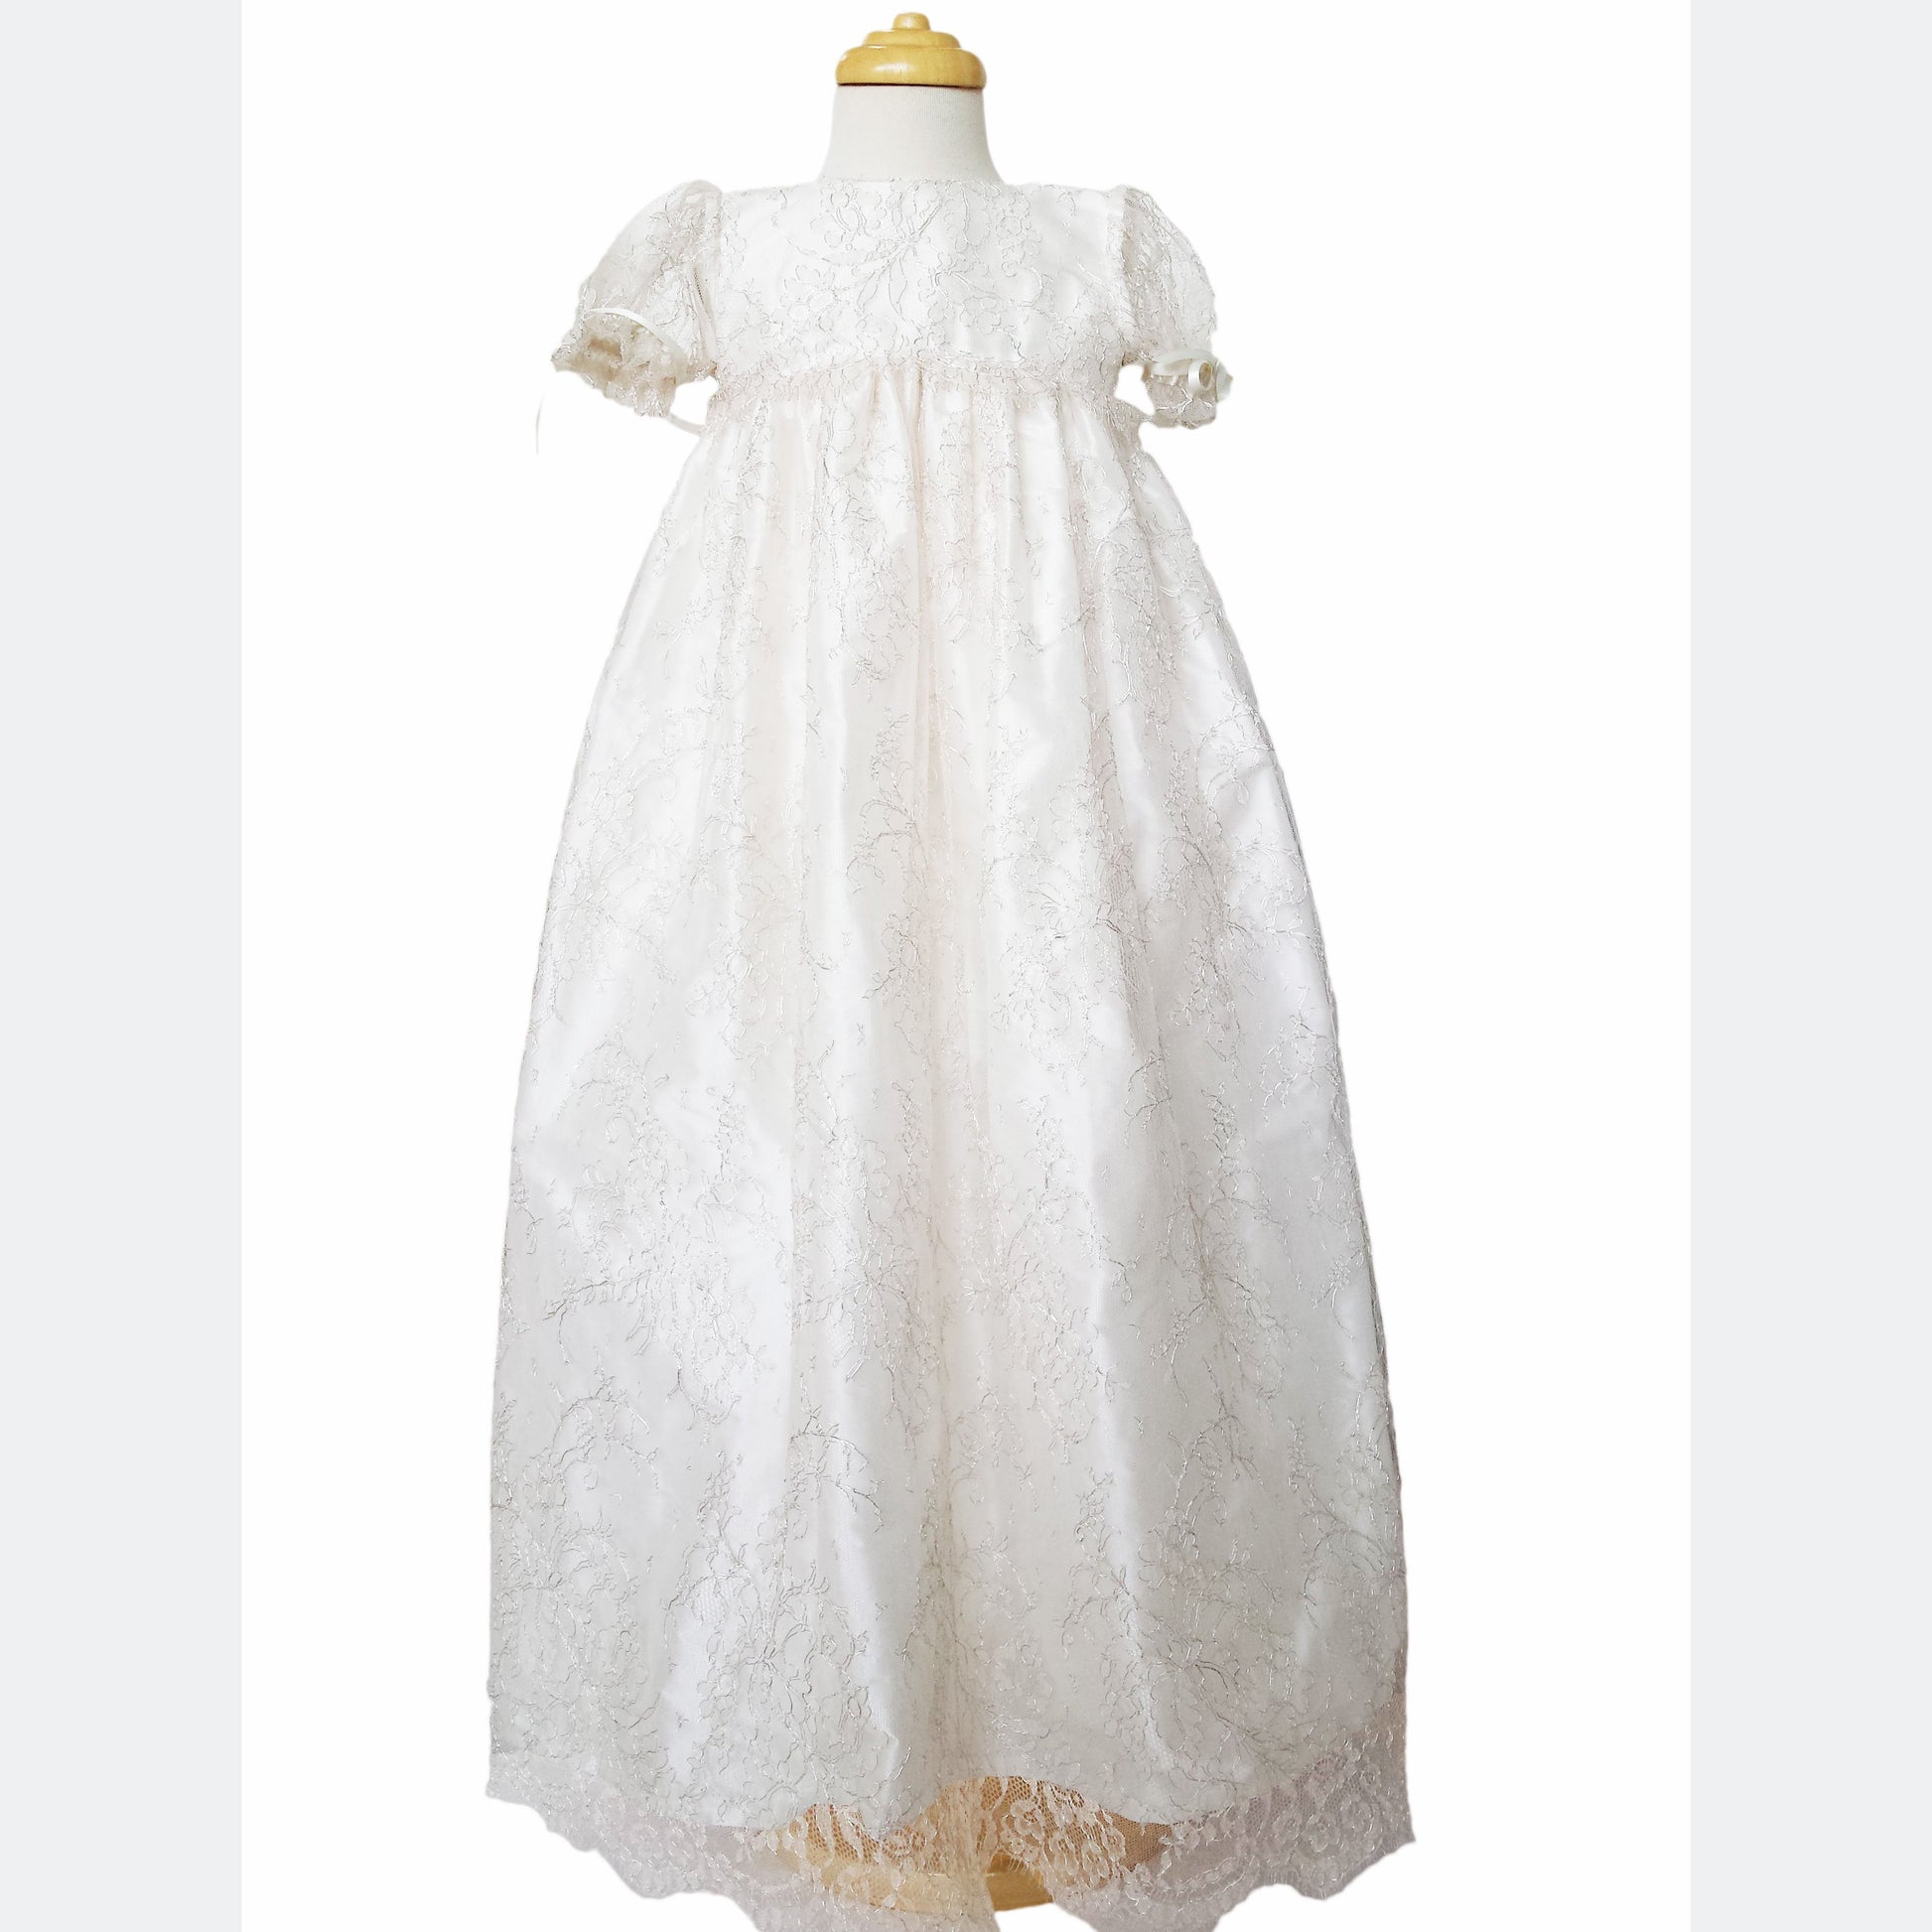 Christening Gown - Princess Angelina - 0